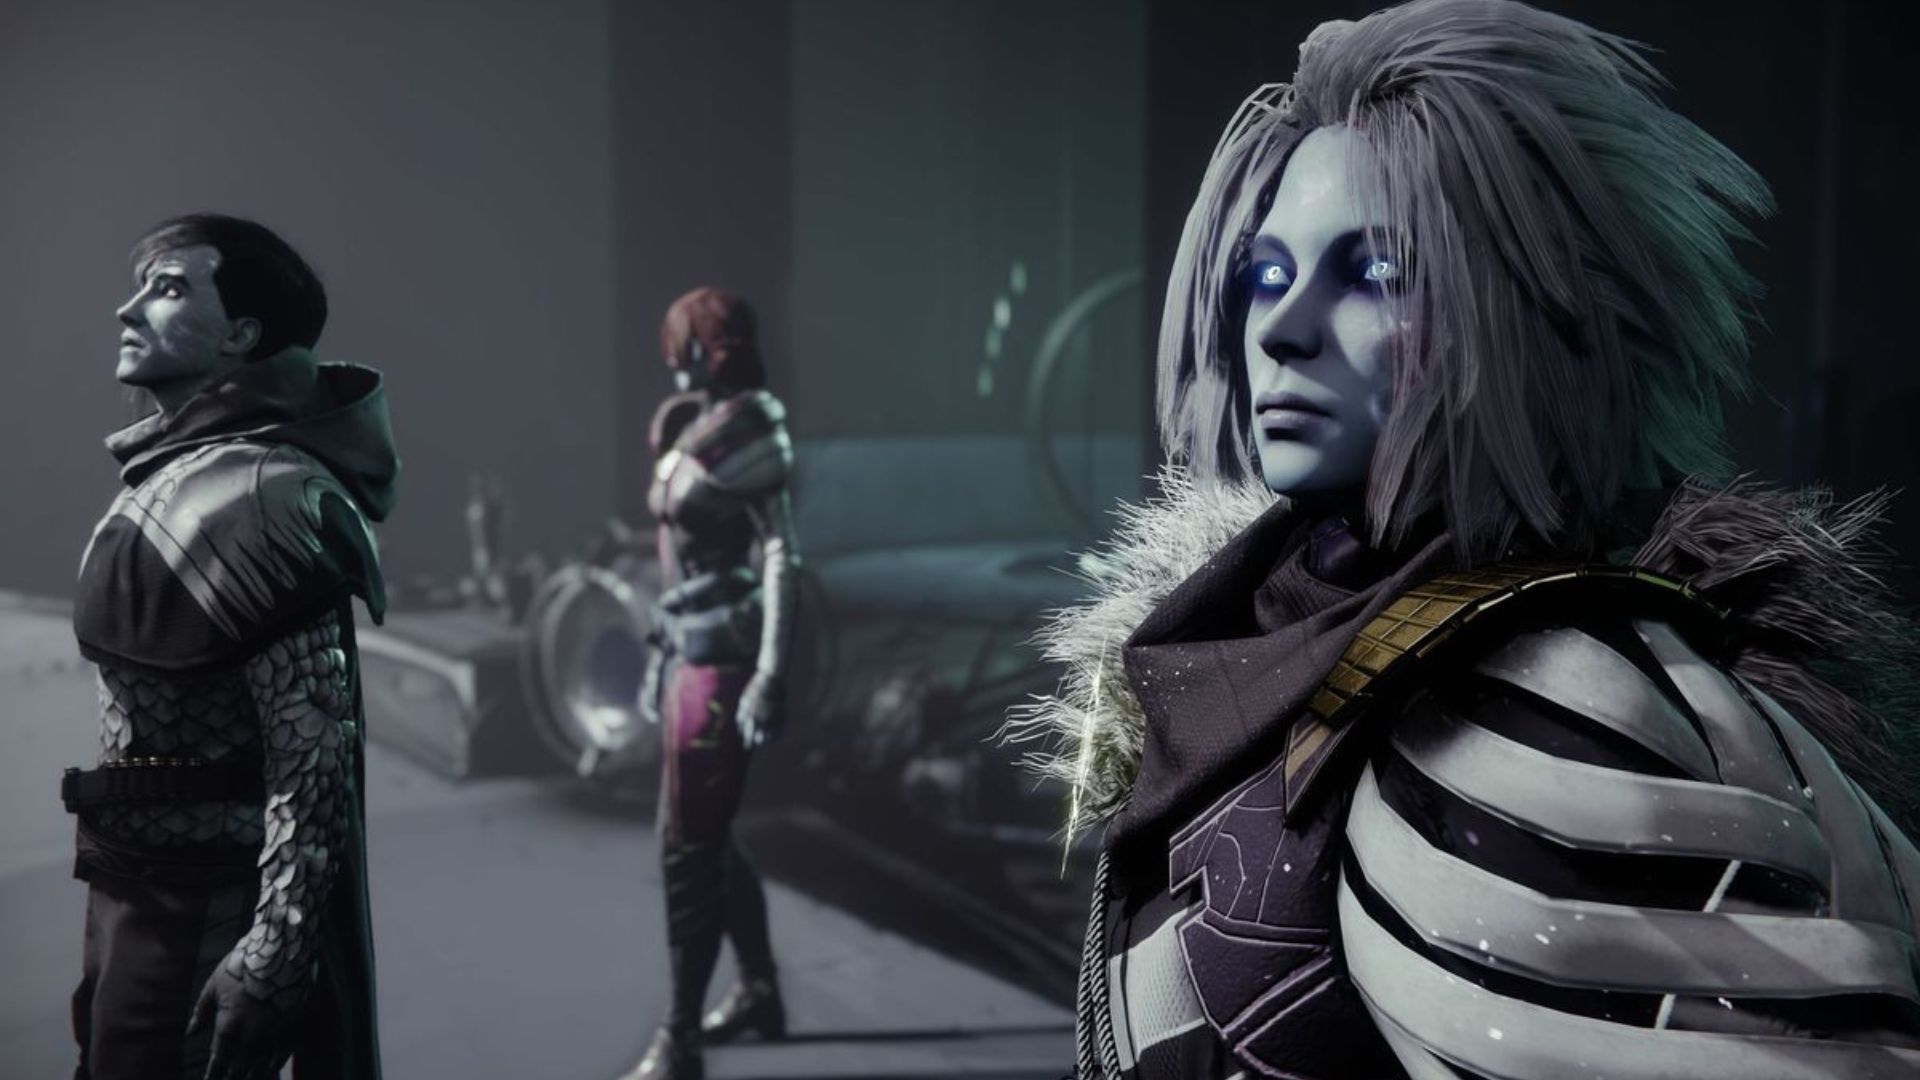 The Crow and Mara Sov are standing next to each other in a dark room looking at something off-screen